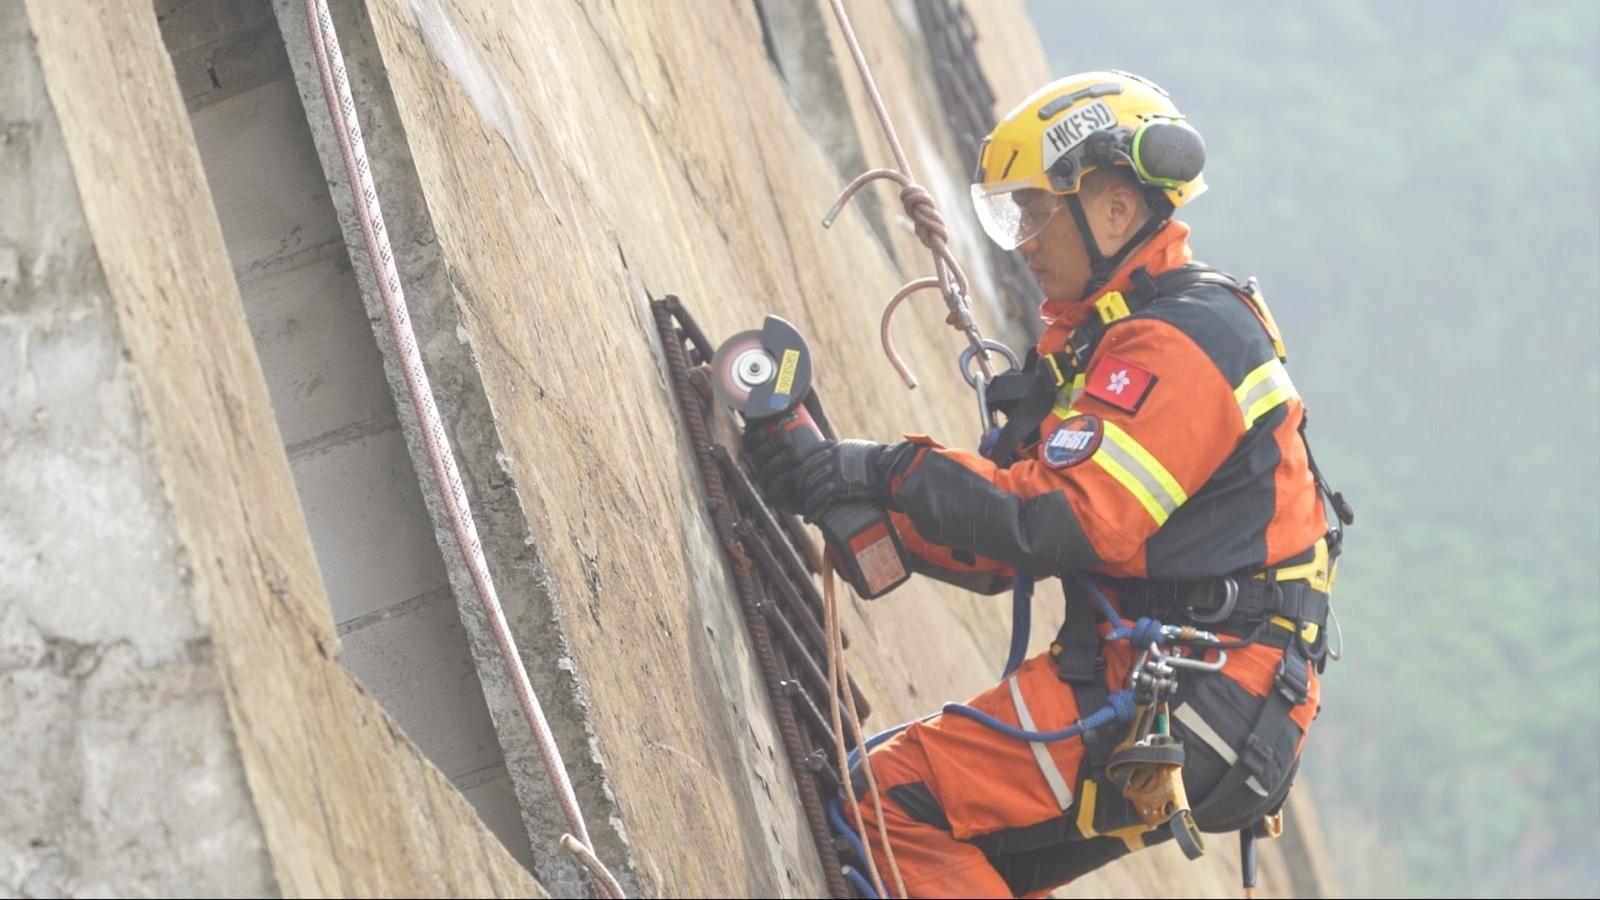 The Fire and Rescue Corps of Guangdong Province, the Hong Kong Fire Services Department (FSD) and the Macao Fire Services Bureau have conducted the Guangdong-Hong Kong-Macao Greater Bay Area joint emergency response and rescue exercise "Liancheng-2024" in Jiangmen, Guangdong Province from May 27 to today (May 29). Photo shows members of the Disaster Response and Rescue Team of the FSD carrying out rescue operations by demolishing the external wall structure of a leaning building.